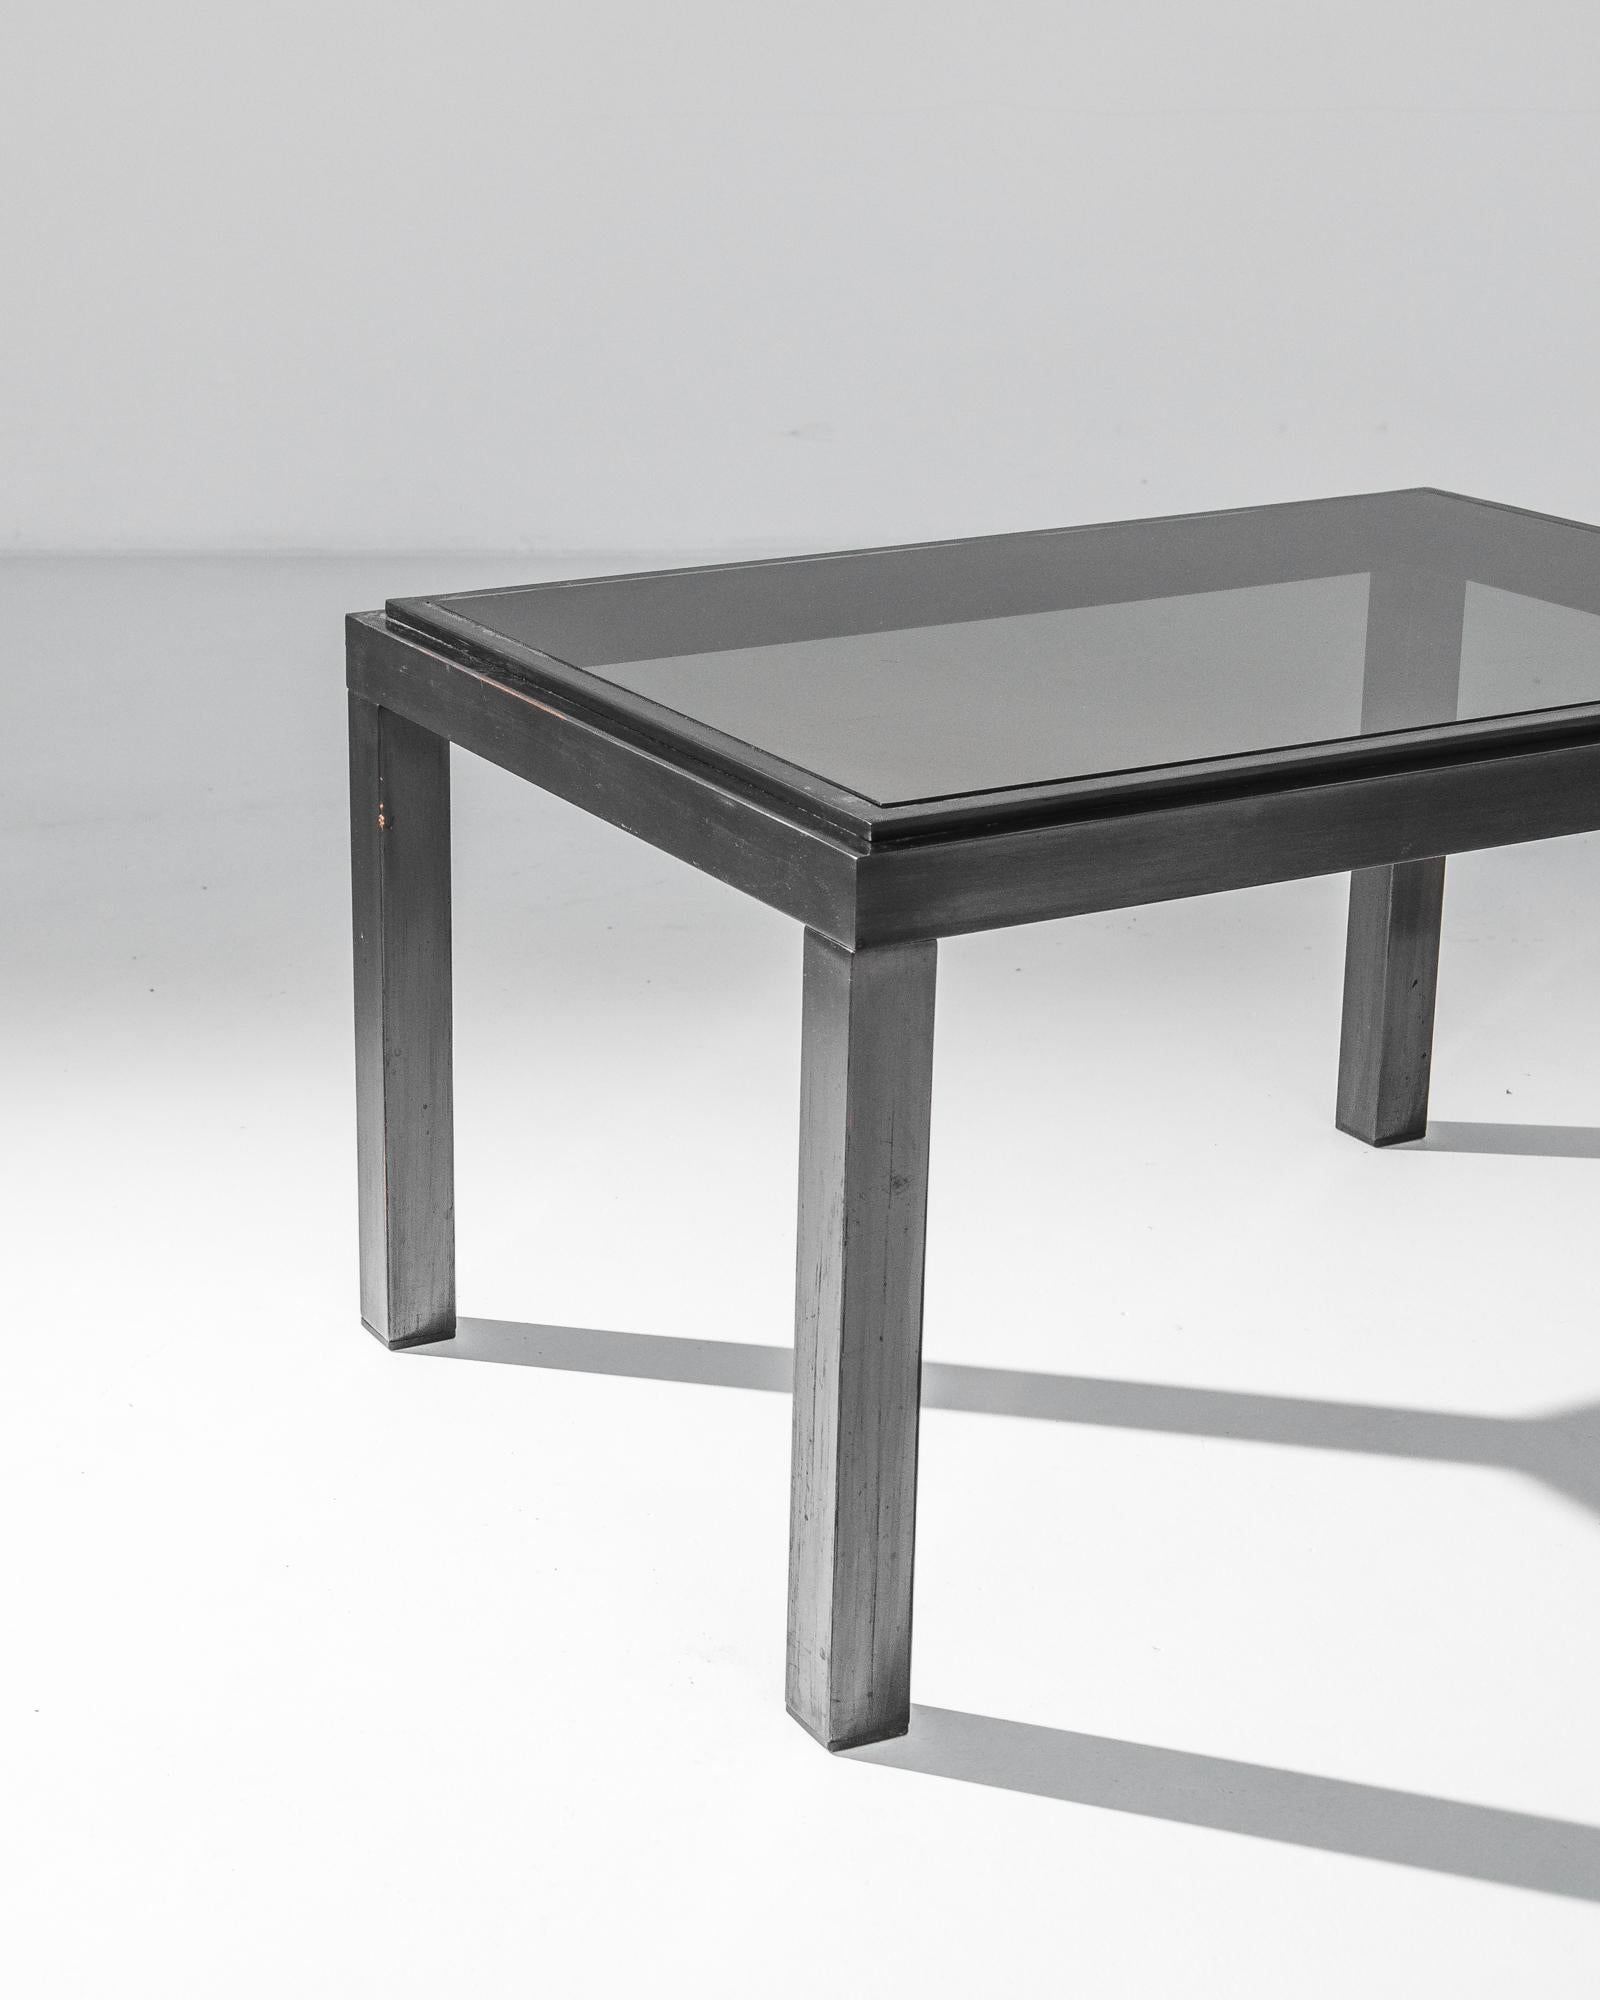 A metal table with glass top from France, produced circa 1970. Strict rectangular pillars hold aloft a darkened glass top in this distinctive table. With its ultramodern chrome silhouette, this table holds within itself dreams of constant progress